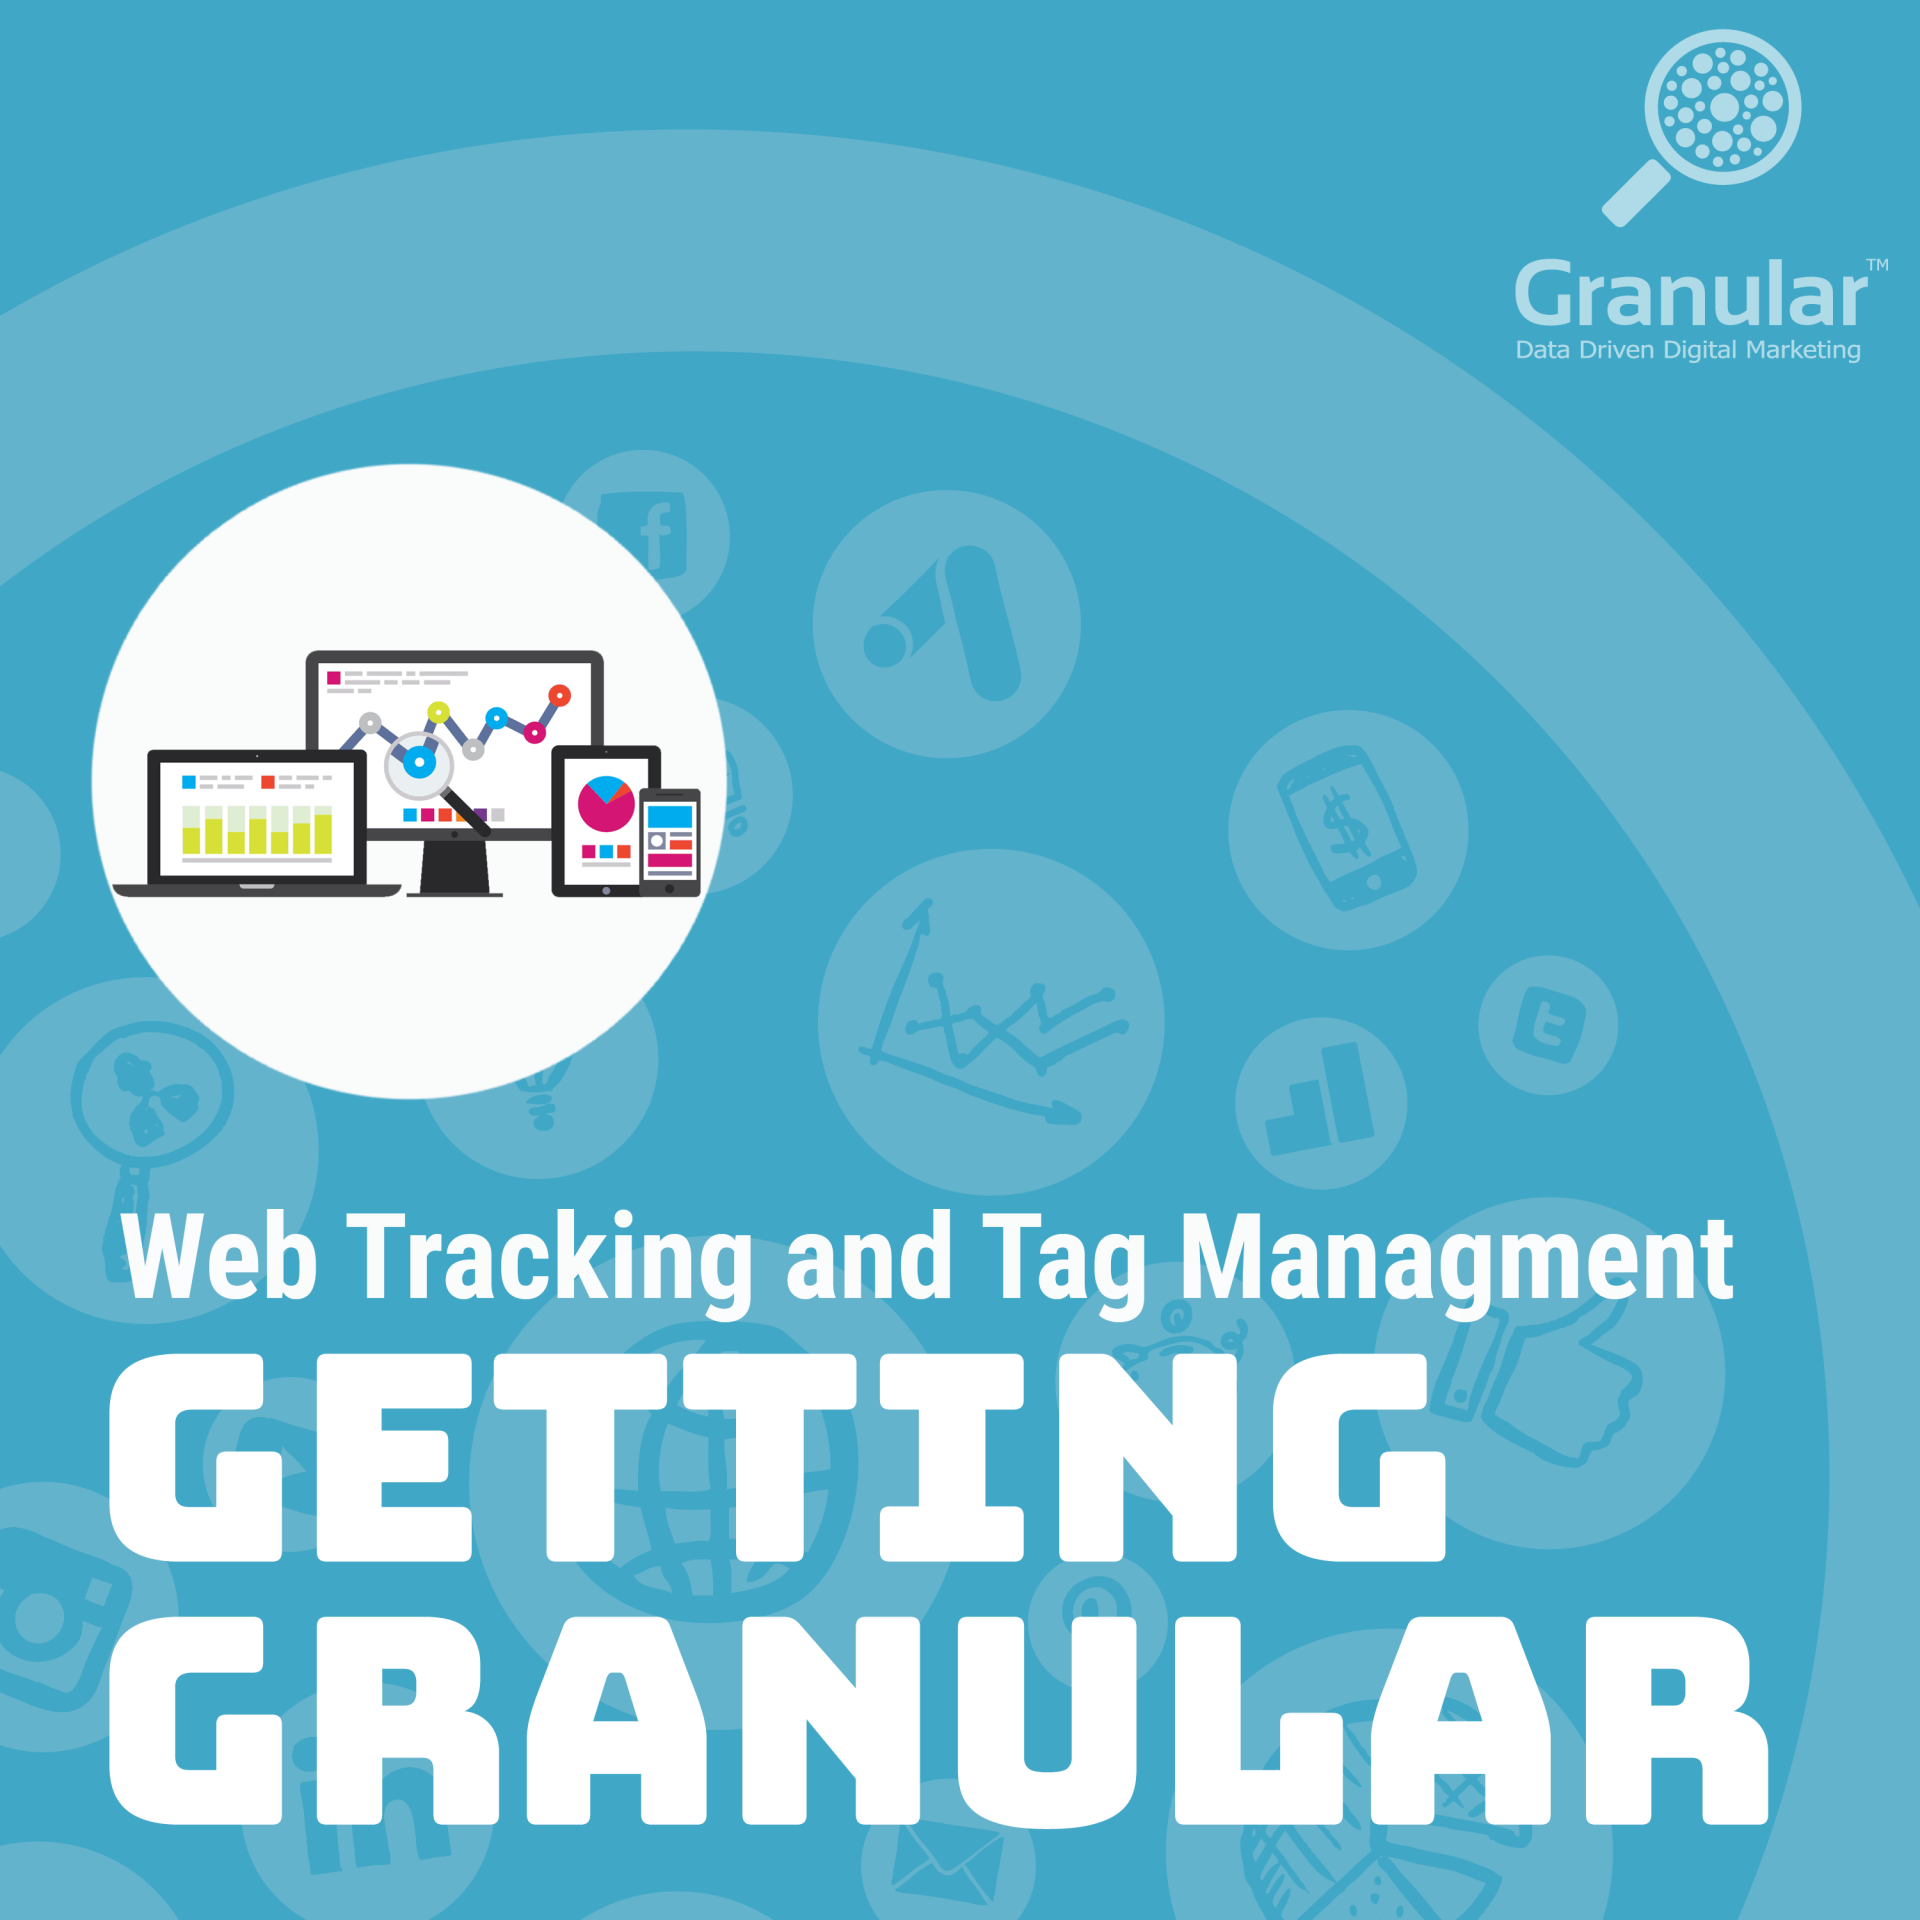 Granular Podcast: Getting Granular - Web Tracking and Tag Management